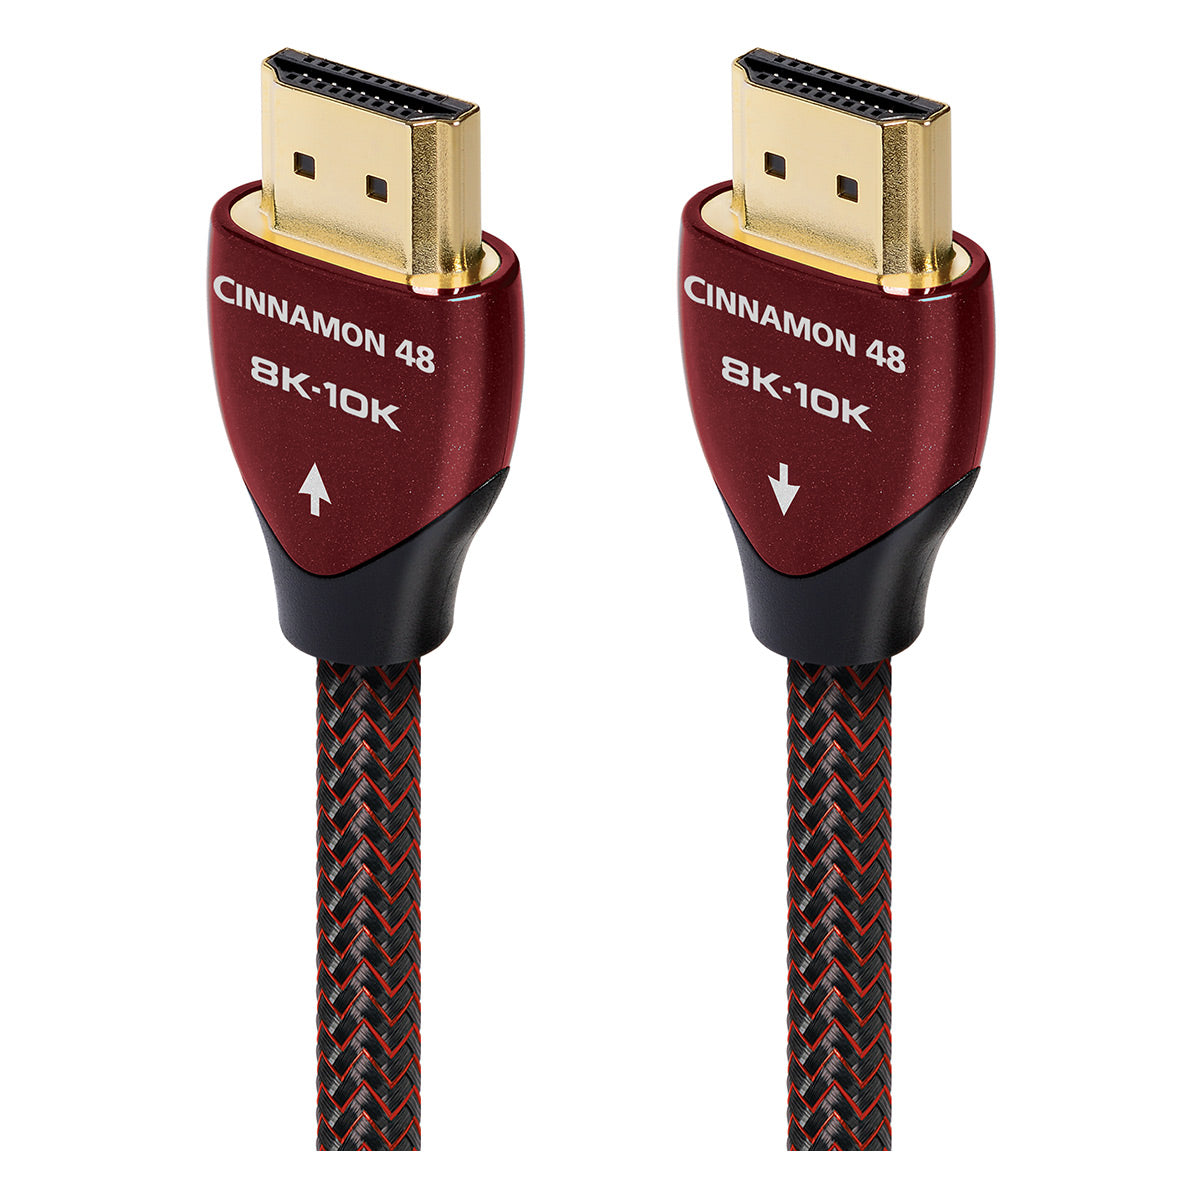 AudioQuest Cinnamon 48 8K-10K 48Gbps Ultra High Speed HDMI Cable - 16.4 ft. (5m)